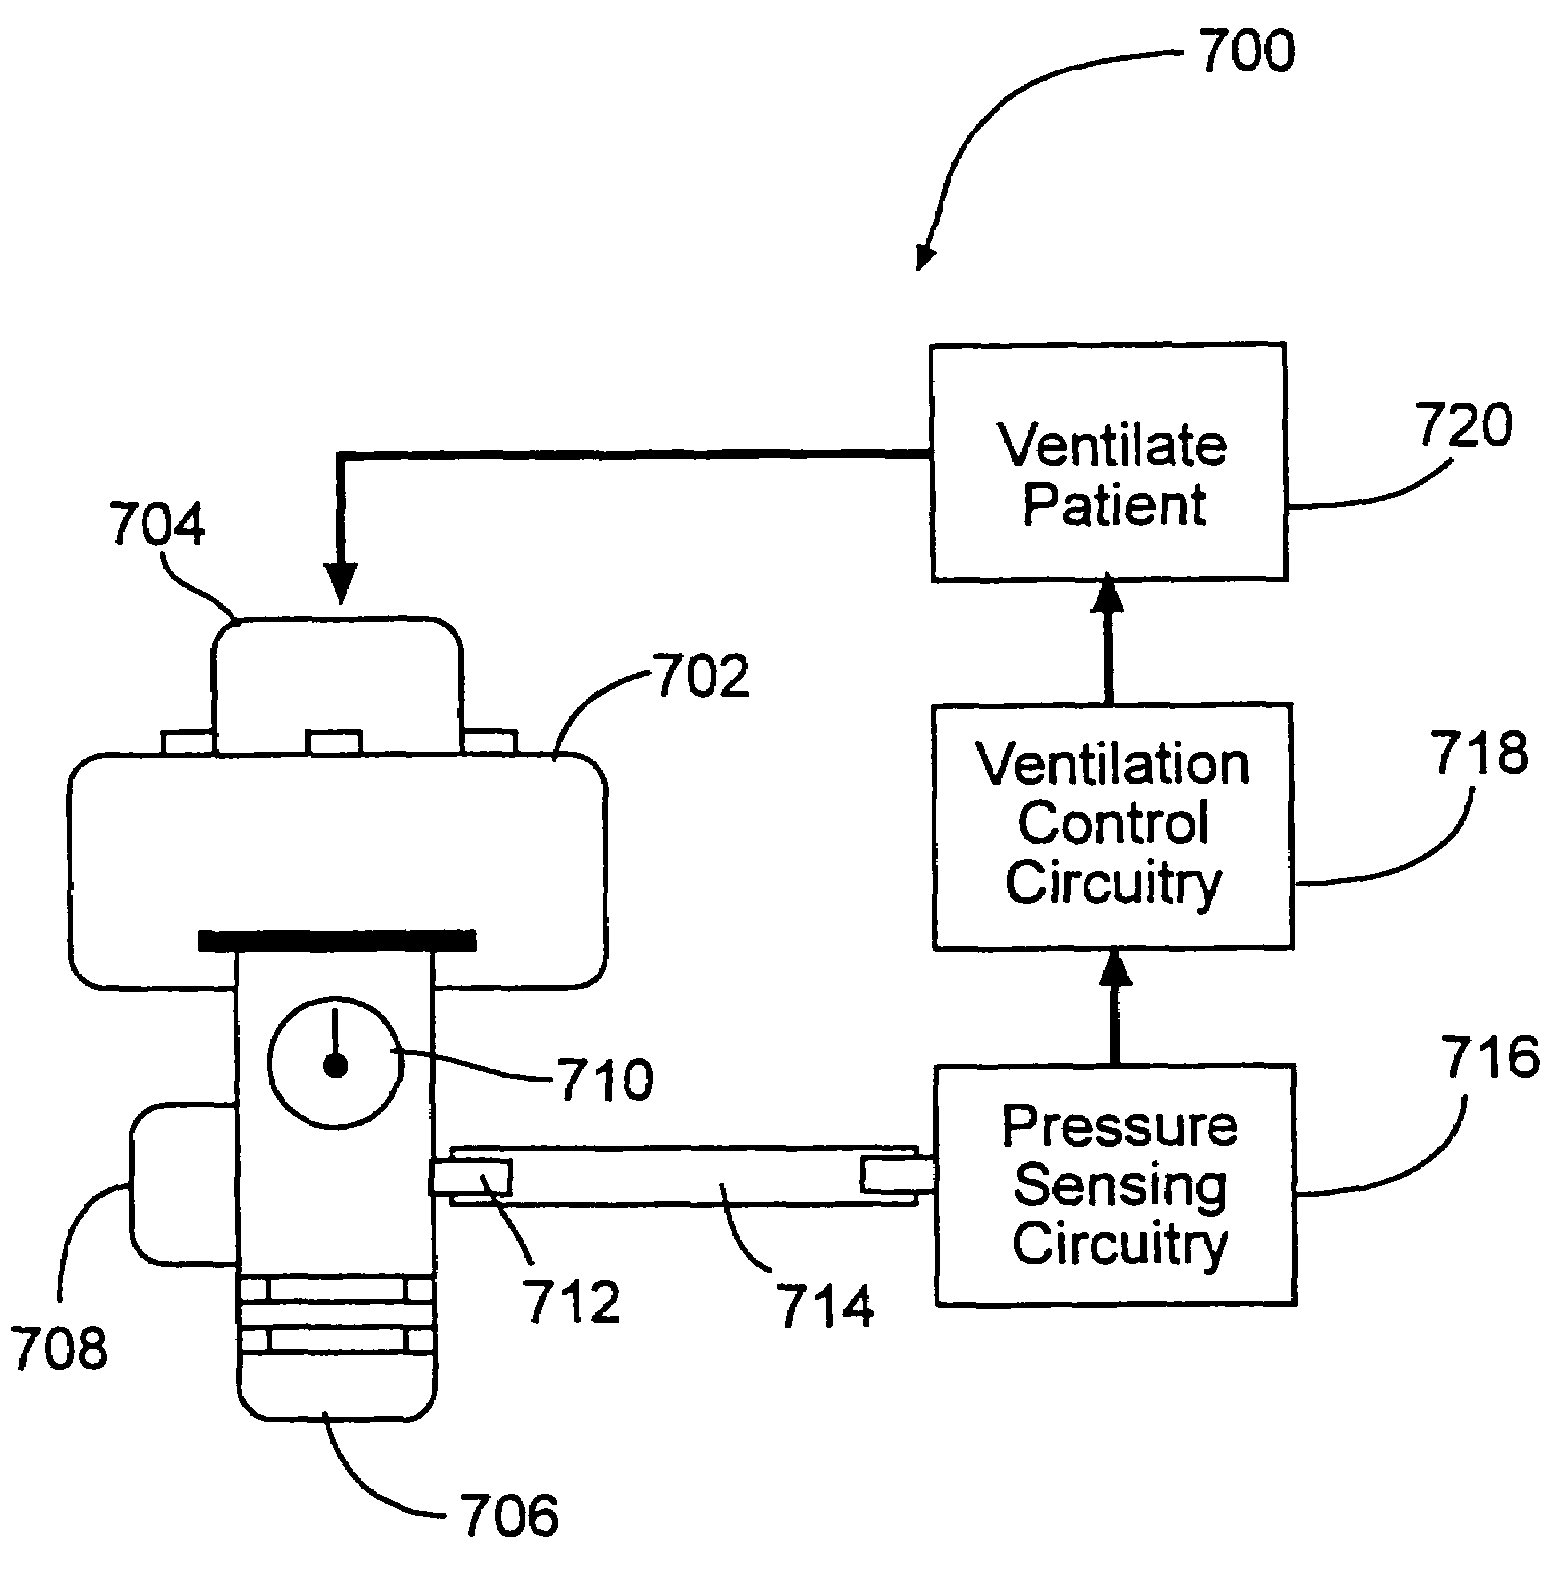 Diabetes treatment systems and methods